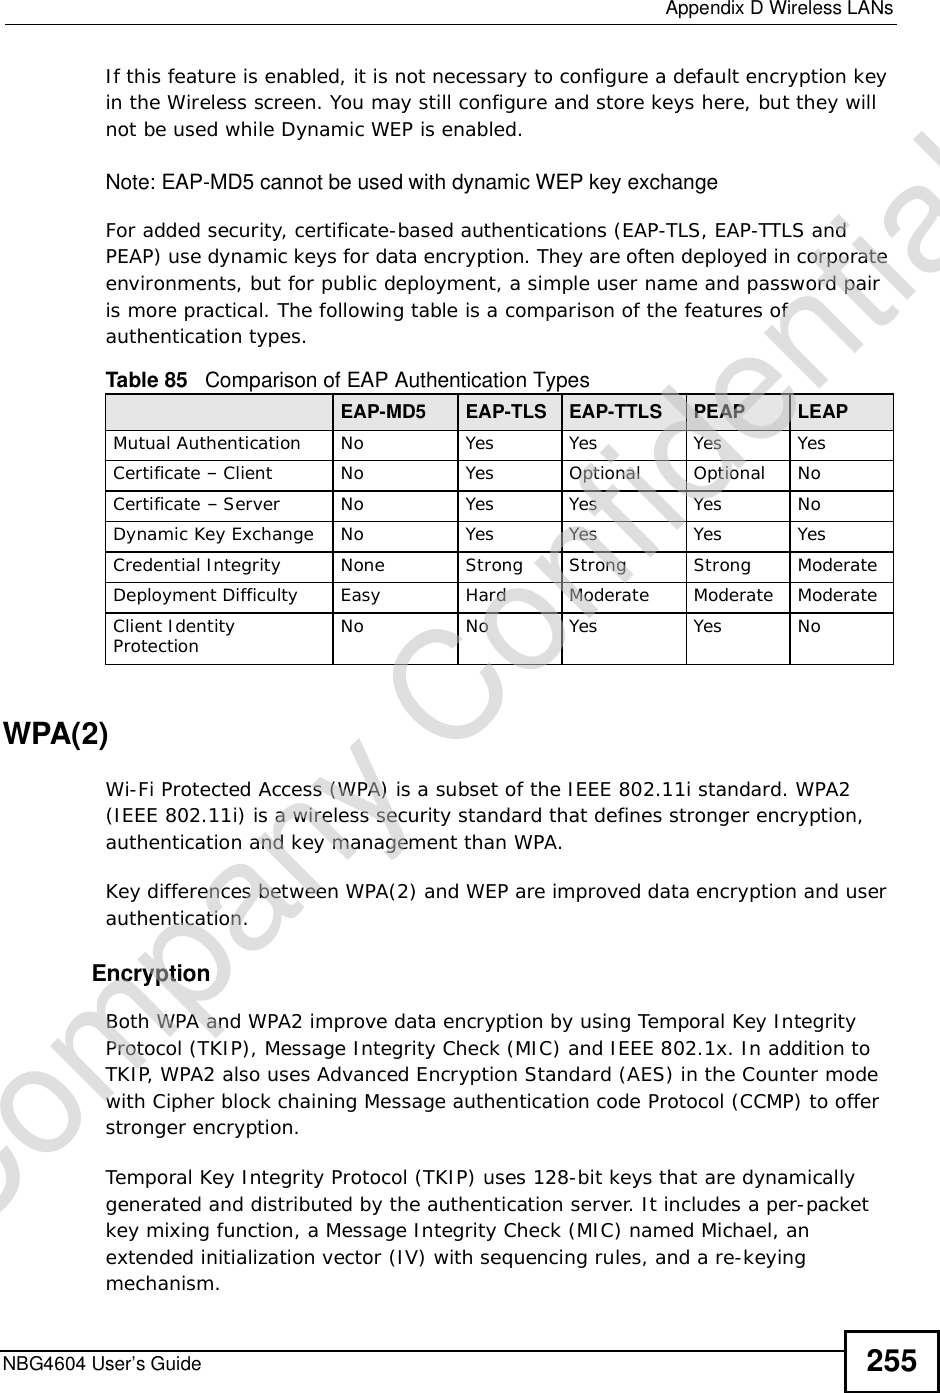  Appendix DWireless LANsNBG4604 User’s Guide 255If this feature is enabled, it is not necessary to configure a default encryption key in the Wireless screen. You may still configure and store keys here, but they will not be used while Dynamic WEP is enabled.Note: EAP-MD5 cannot be used with dynamic WEP key exchangeFor added security, certificate-based authentications (EAP-TLS, EAP-TTLS and PEAP) use dynamic keys for data encryption. They are often deployed in corporate environments, but for public deployment, a simple user name and password pair is more practical. The following table is a comparison of the features of authentication types.WPA(2)Wi-Fi Protected Access (WPA) is a subset of the IEEE 802.11i standard. WPA2 (IEEE 802.11i) is a wireless security standard that defines stronger encryption, authentication and key management than WPA. Key differences between WPA(2) and WEP are improved data encryption and user authentication.    EncryptionBoth WPA and WPA2 improve data encryption by using Temporal Key Integrity Protocol (TKIP), Message Integrity Check (MIC) and IEEE 802.1x. In addition to TKIP, WPA2 also uses Advanced Encryption Standard (AES) in the Counter mode with Cipher block chaining Message authentication code Protocol (CCMP) to offer stronger encryption. Temporal Key Integrity Protocol (TKIP) uses 128-bit keys that are dynamically generated and distributed by the authentication server. It includes a per-packet key mixing function, a Message Integrity Check (MIC) named Michael, an extended initialization vector (IV) with sequencing rules, and a re-keying mechanism.Table 85   Comparison of EAP Authentication TypesEAP-MD5 EAP-TLS EAP-TTLS PEAP LEAPMutual Authentication No Yes Yes Yes YesCertificate – Client No Yes Optional Optional NoCertificate – Server No Yes Yes Yes NoDynamic Key Exchange No Yes Yes Yes YesCredential Integrity None Strong Strong Strong ModerateDeployment Difficulty Easy Hard Moderate Moderate ModerateClient Identity Protection No No Yes Yes NoCompany Confidential